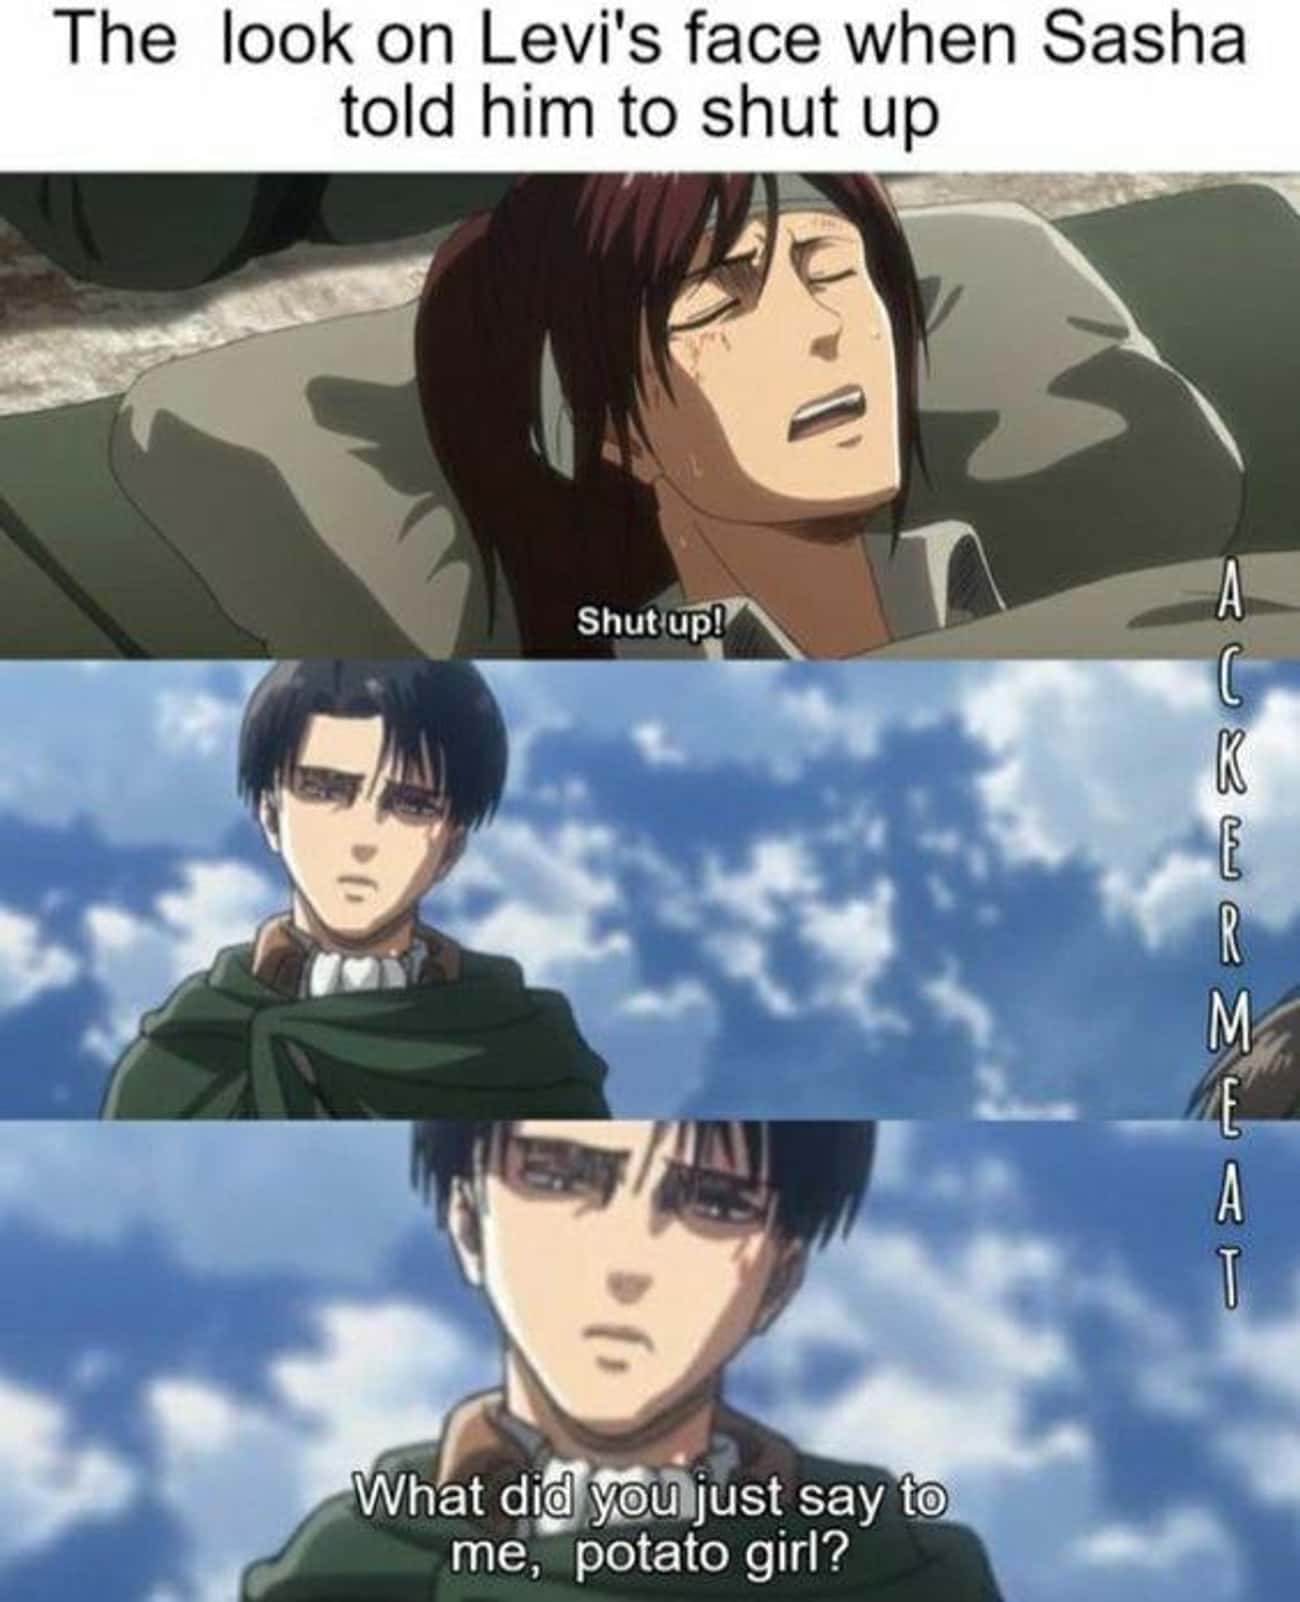 Fans Are Pointing Out Hilarious Things They Noticed In ‘Attack On Titan’